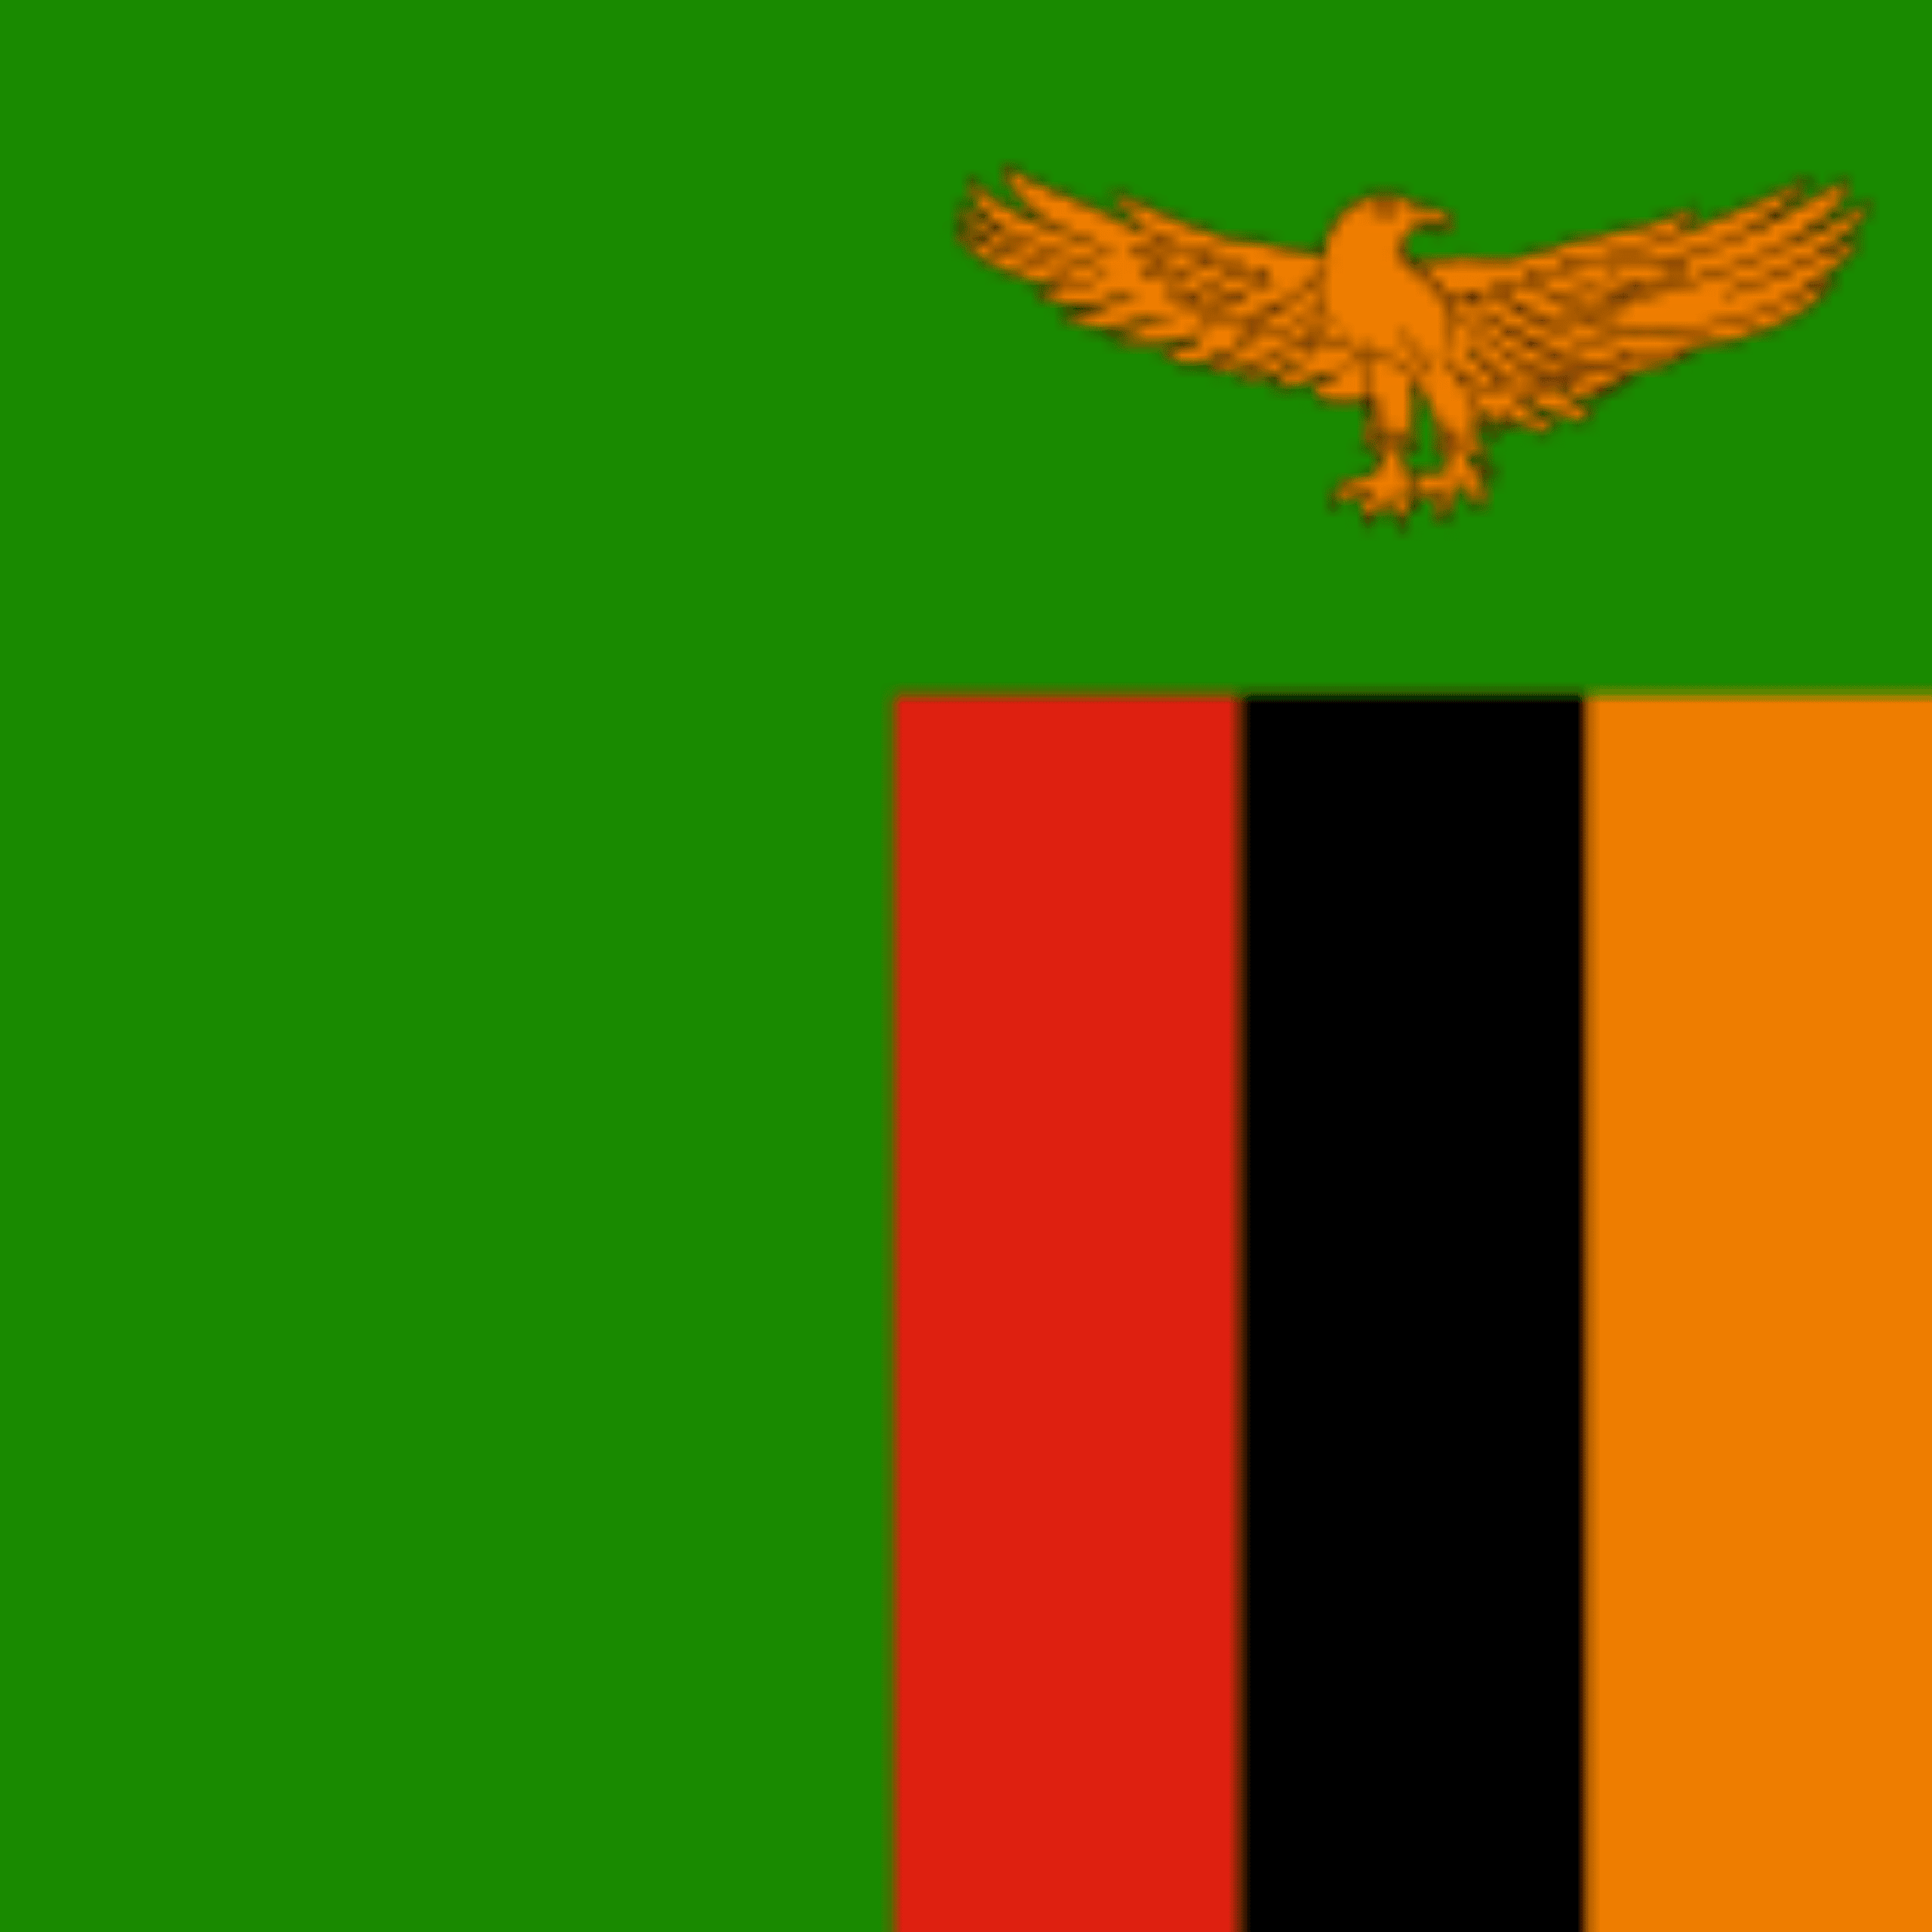 Is Zambia a Wealthy country?